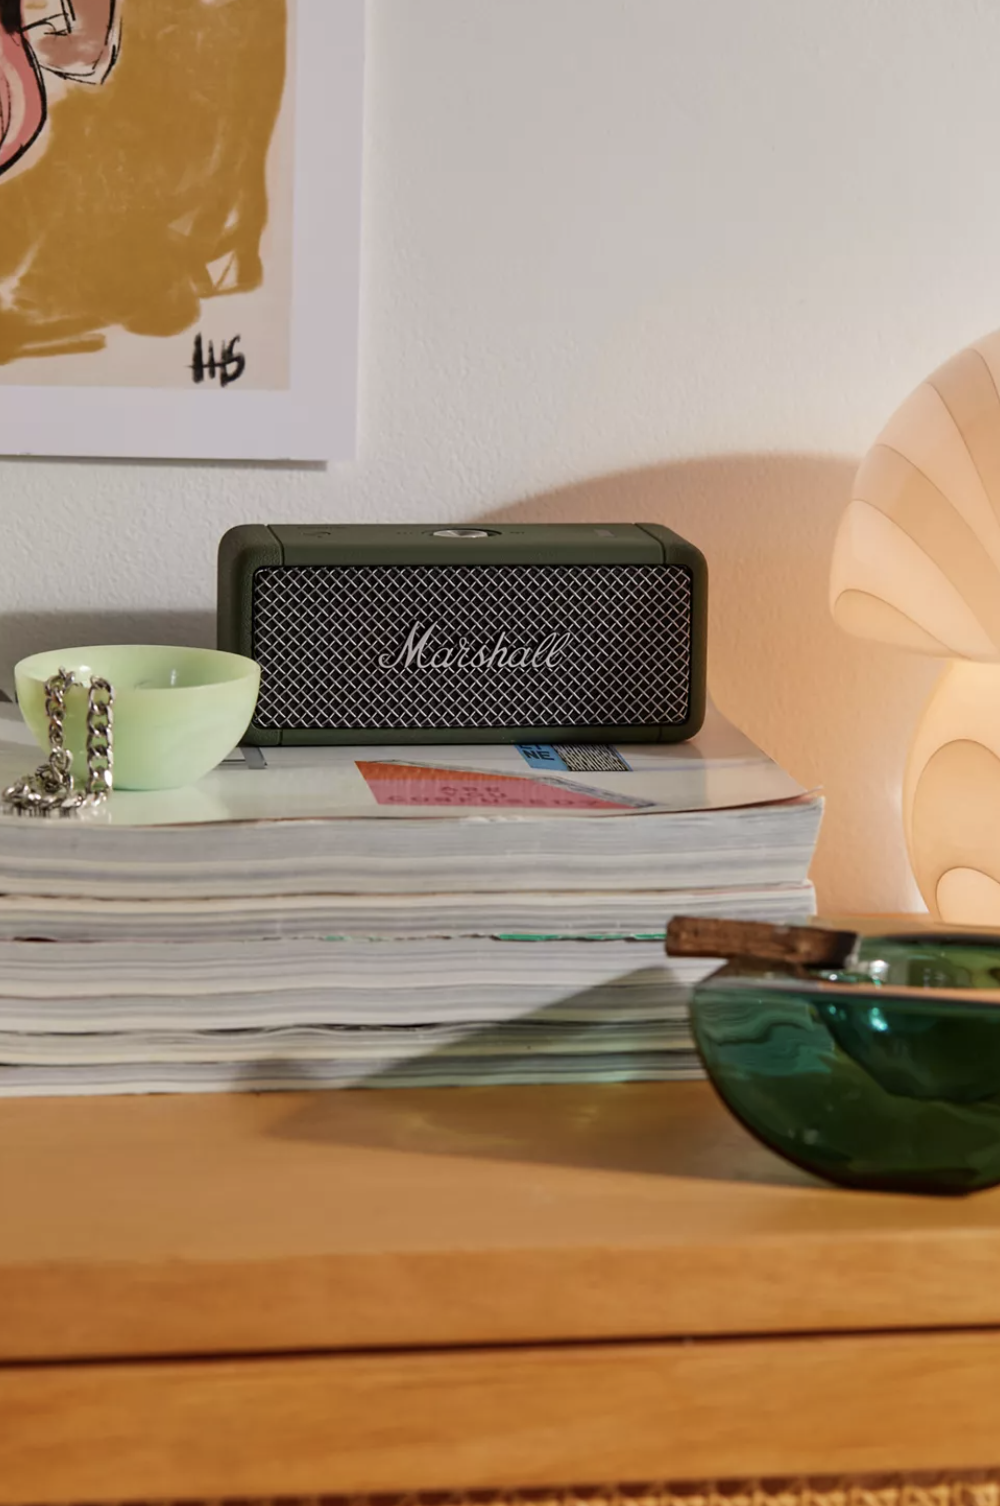 The Green Marshall speaker sits atop some magazines on a side table